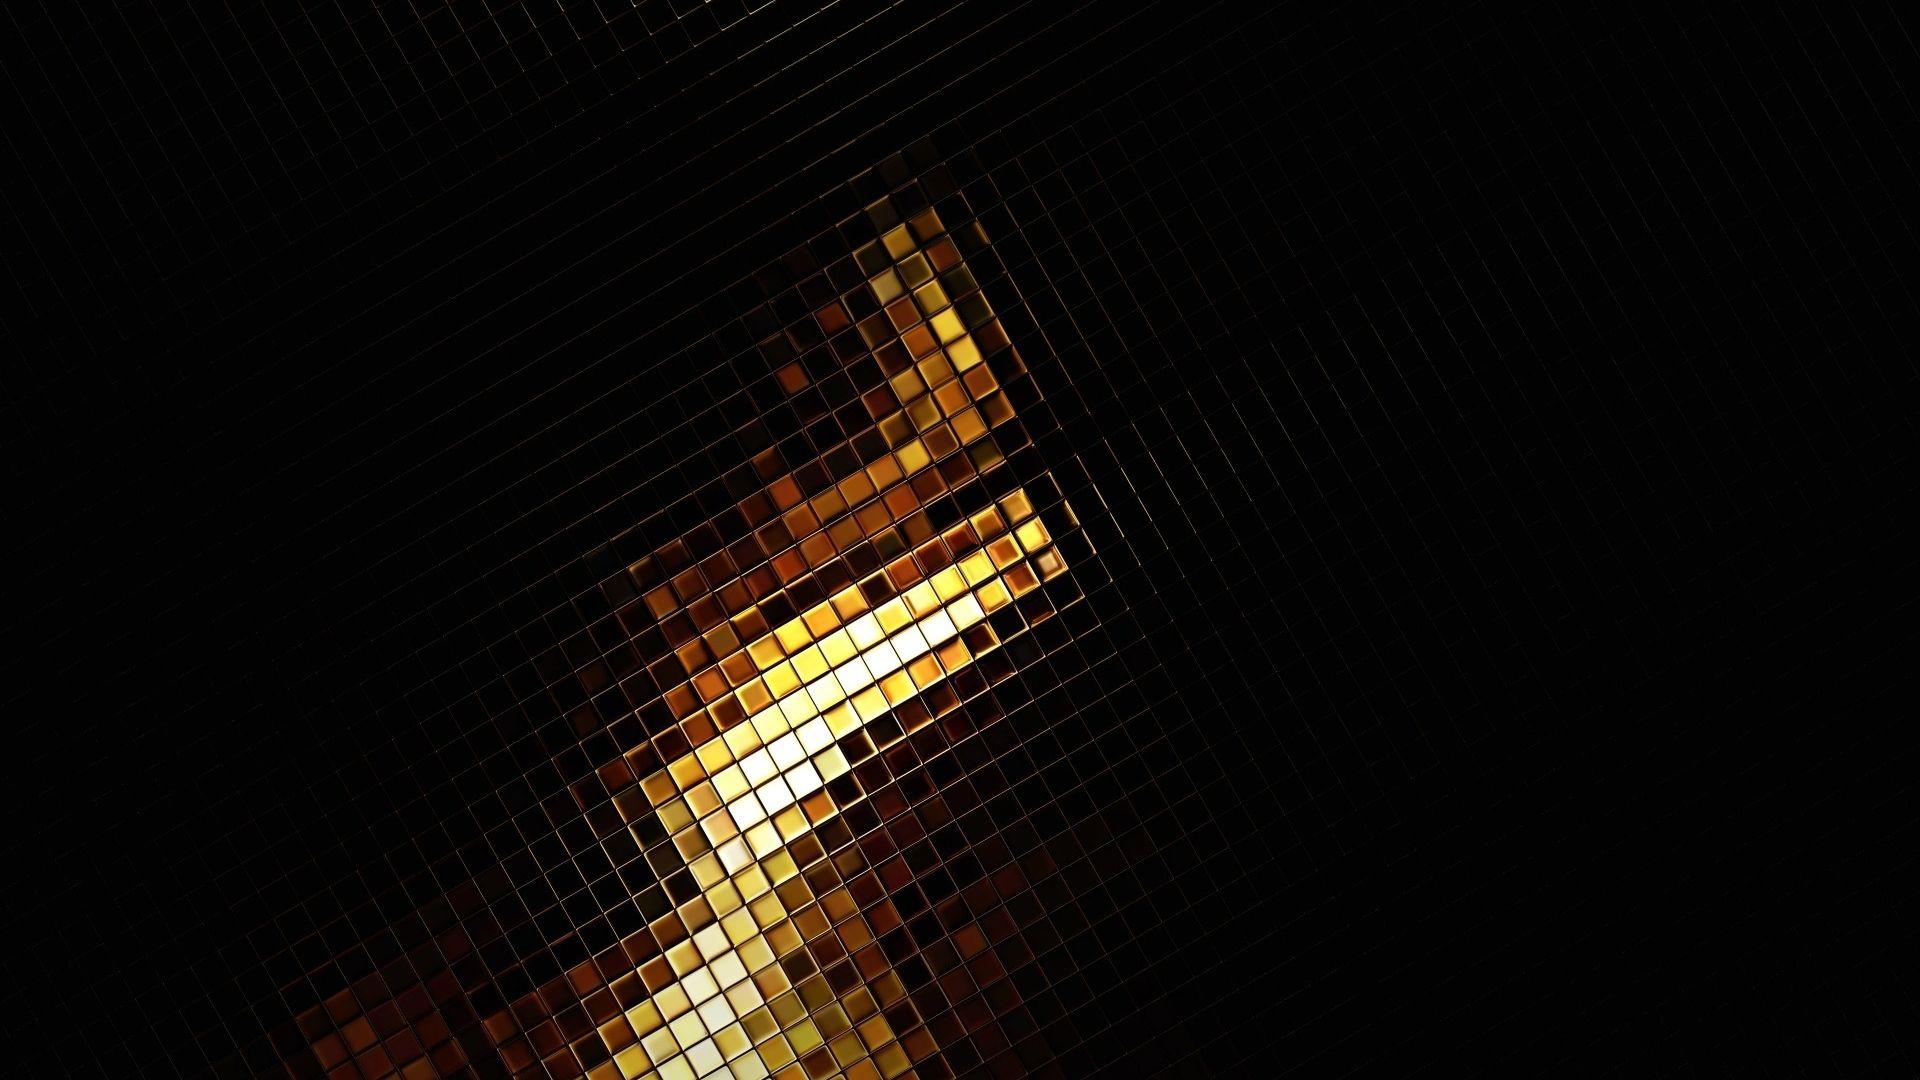  Gold  4K  Wallpapers  Top Free Gold  4K  Backgrounds  